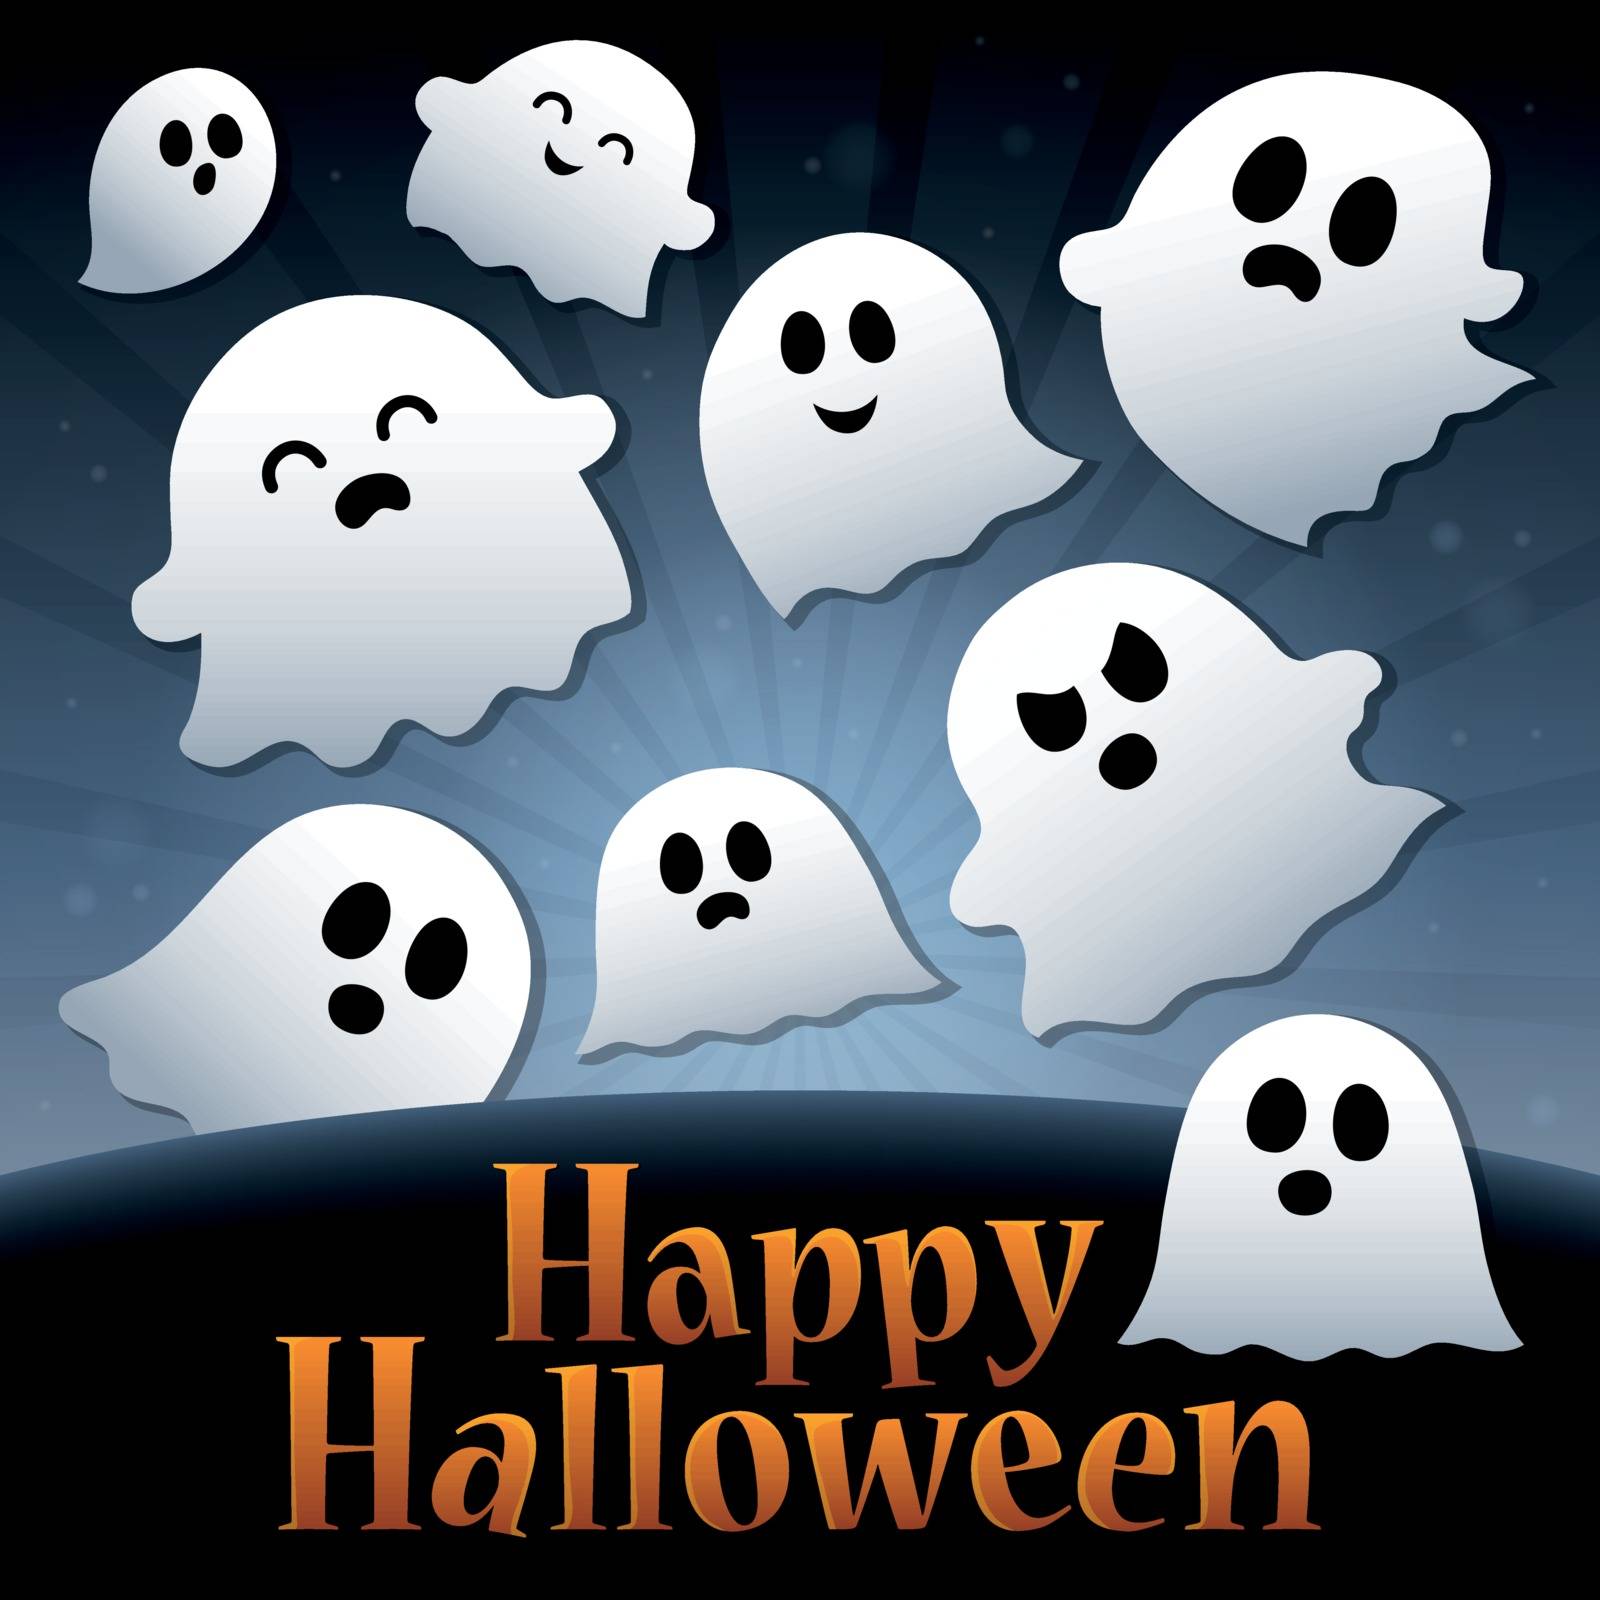 Happy Halloween sign thematic image 3 - eps10 vector illustration.